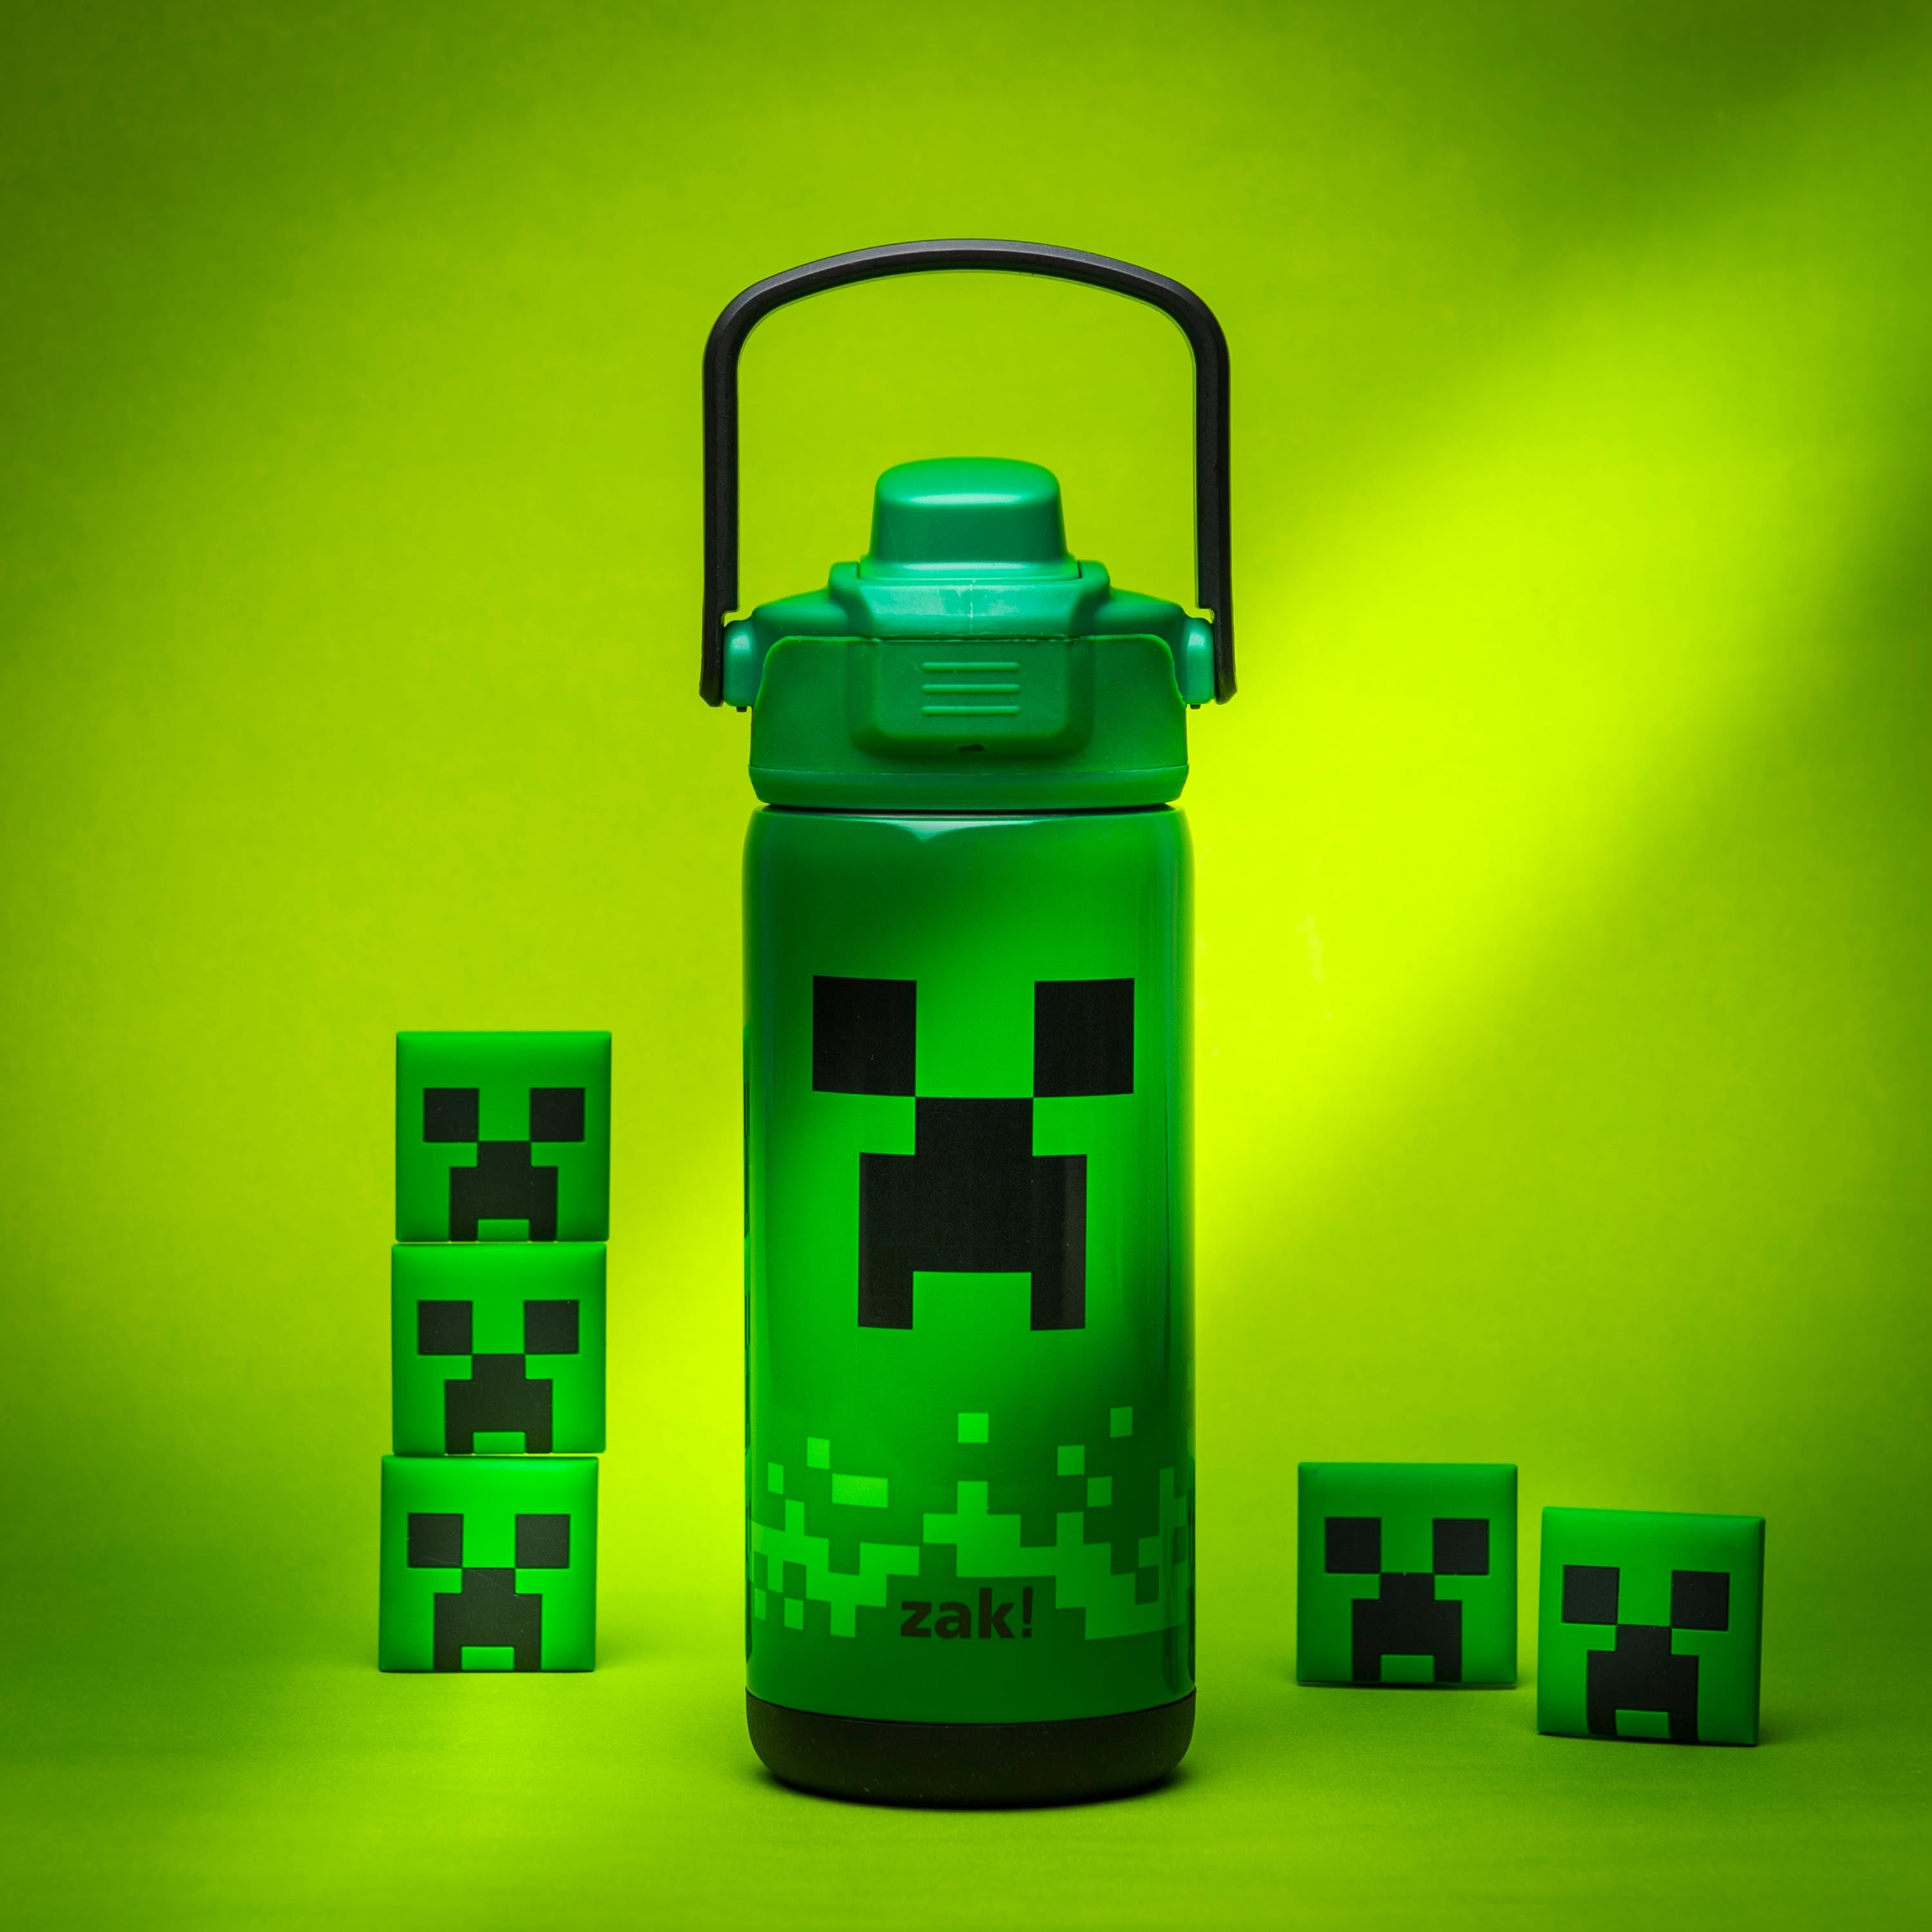 Minecraft Creeper Beacon Stainless Steel Insulated Kids Water Bottle with Covered Spout, 14 Ounces